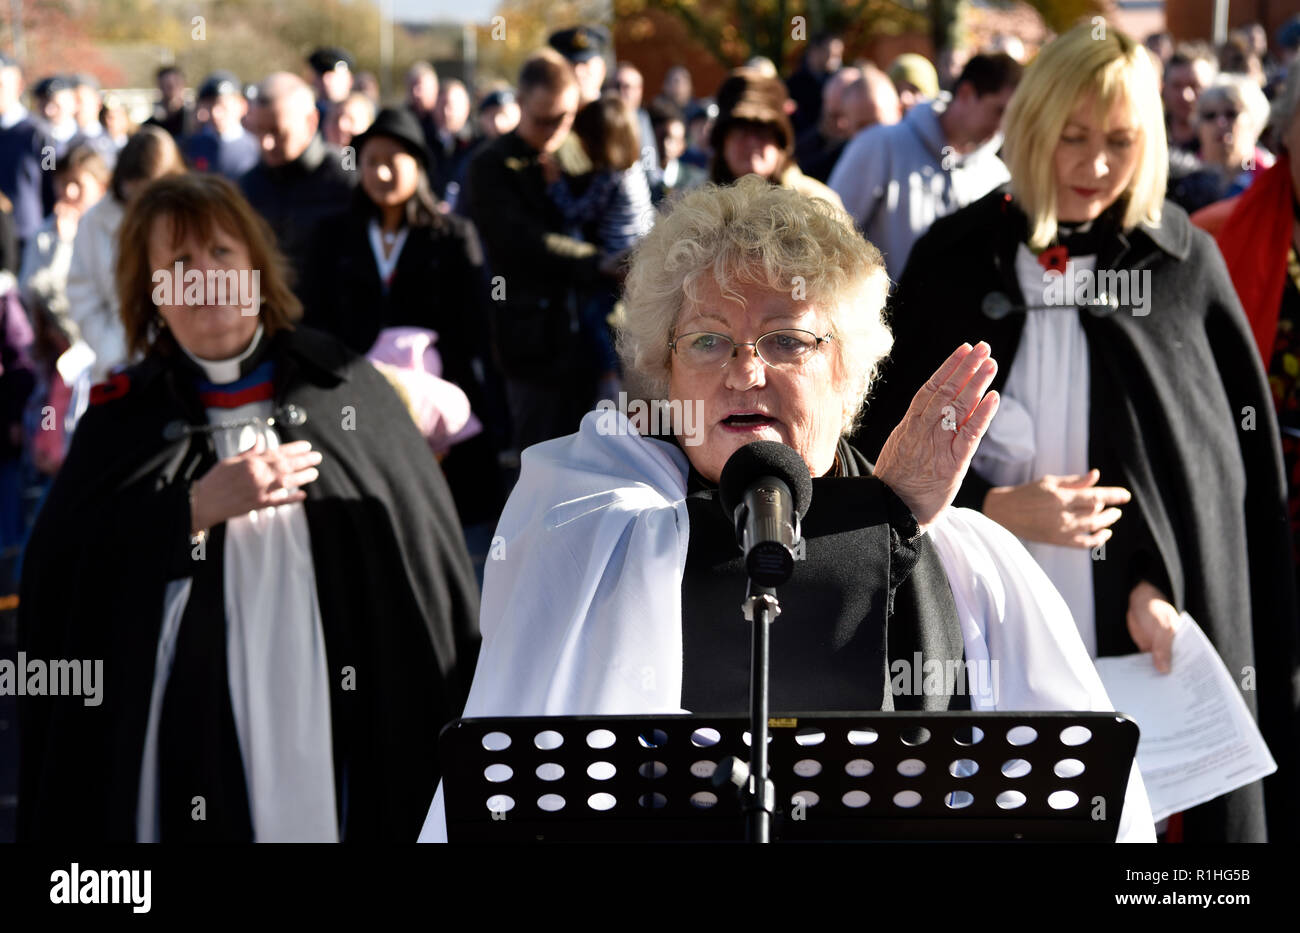 Female members of the clergy addressing audience during Remembrance Sunday, War Memorial, Bordon, Hampshire, UK. 11.11.2018. Stock Photo